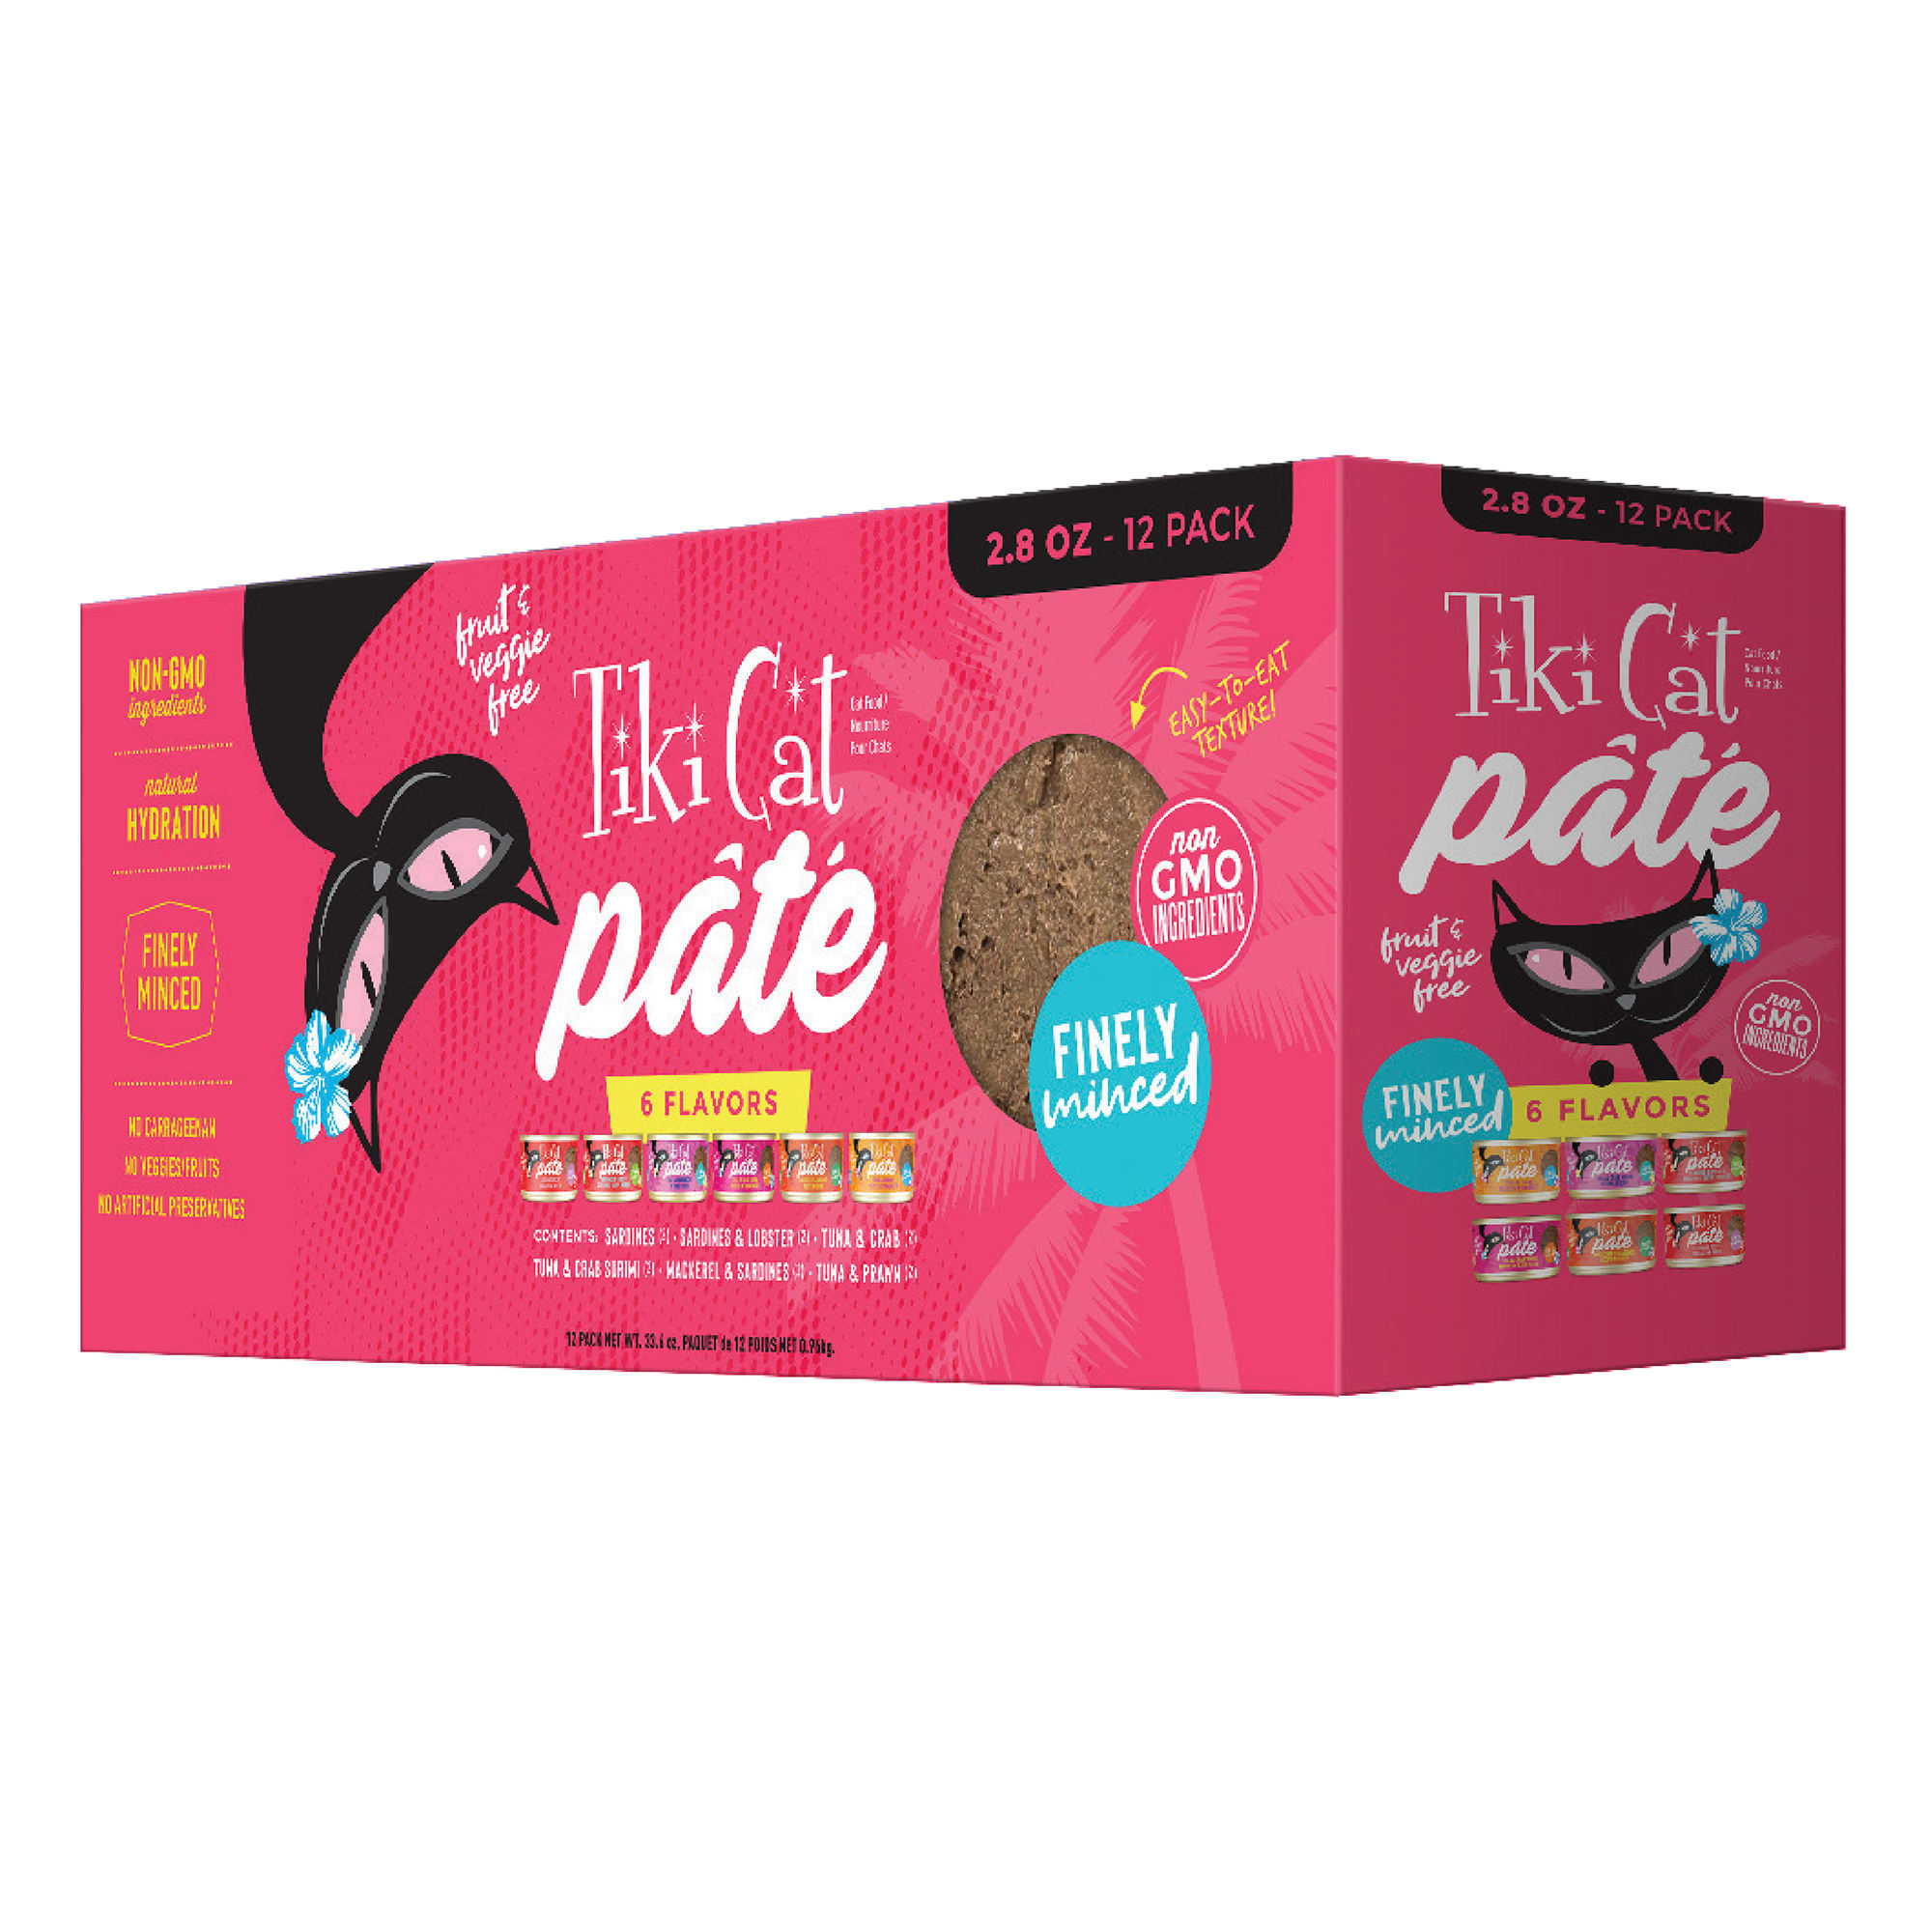 Tiki Cat Grill Pate Variety Pack Wet Food, 2.8 oz., Count of 12 Petco